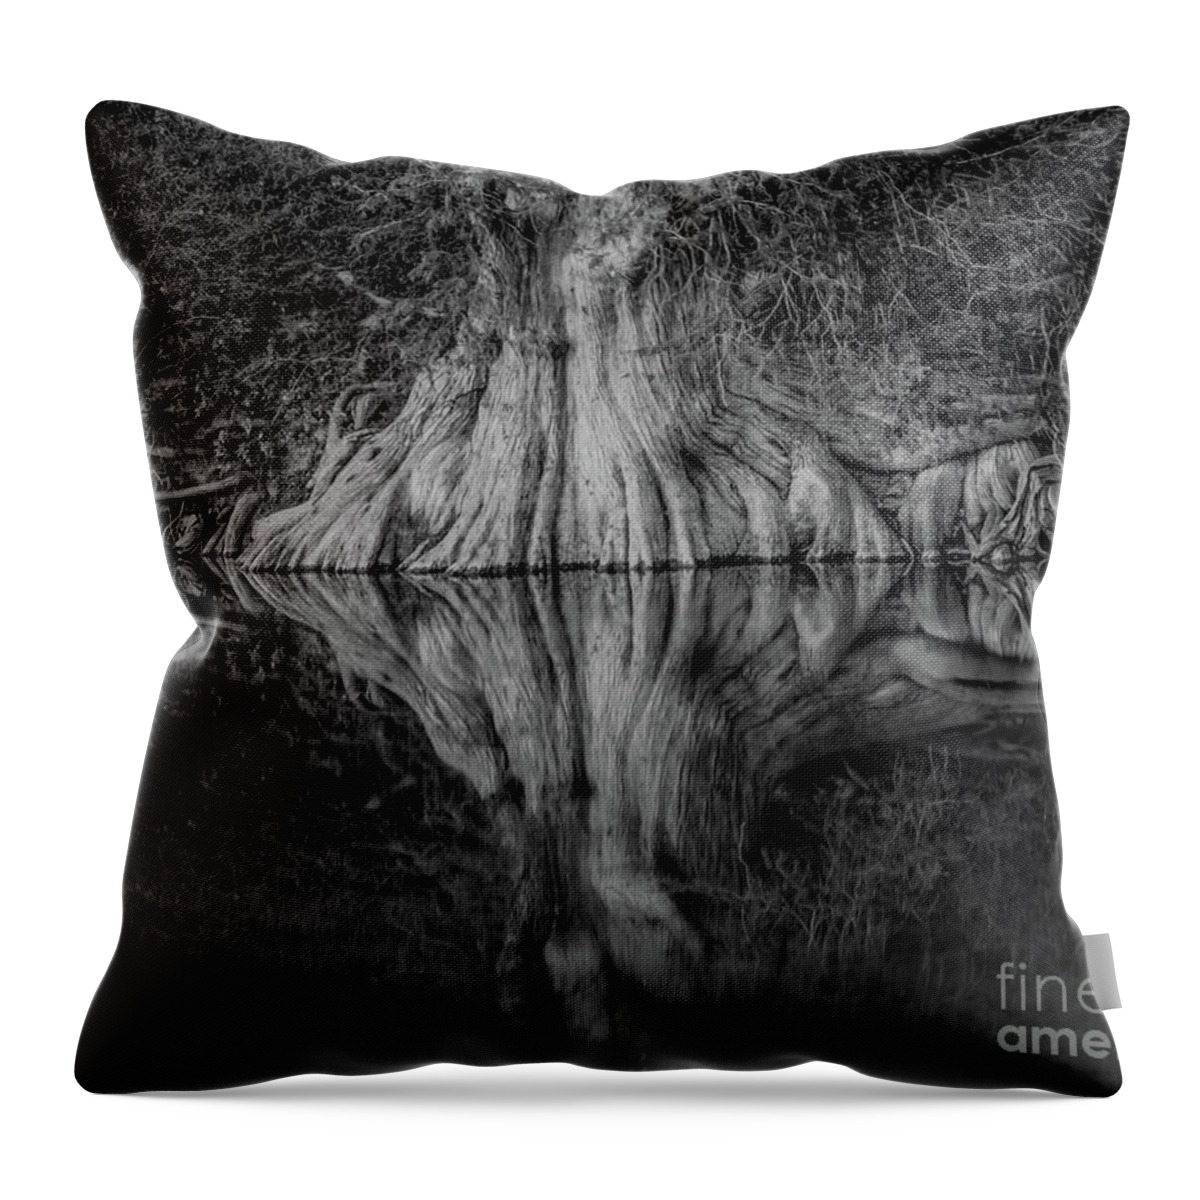 Bald Cypress Reflection In Black And White Michael Tidwell Guadalupe River Mike Tidwell Throw Pillow featuring the photograph Bald Cypress Reflection in Black and White by Michael Tidwell